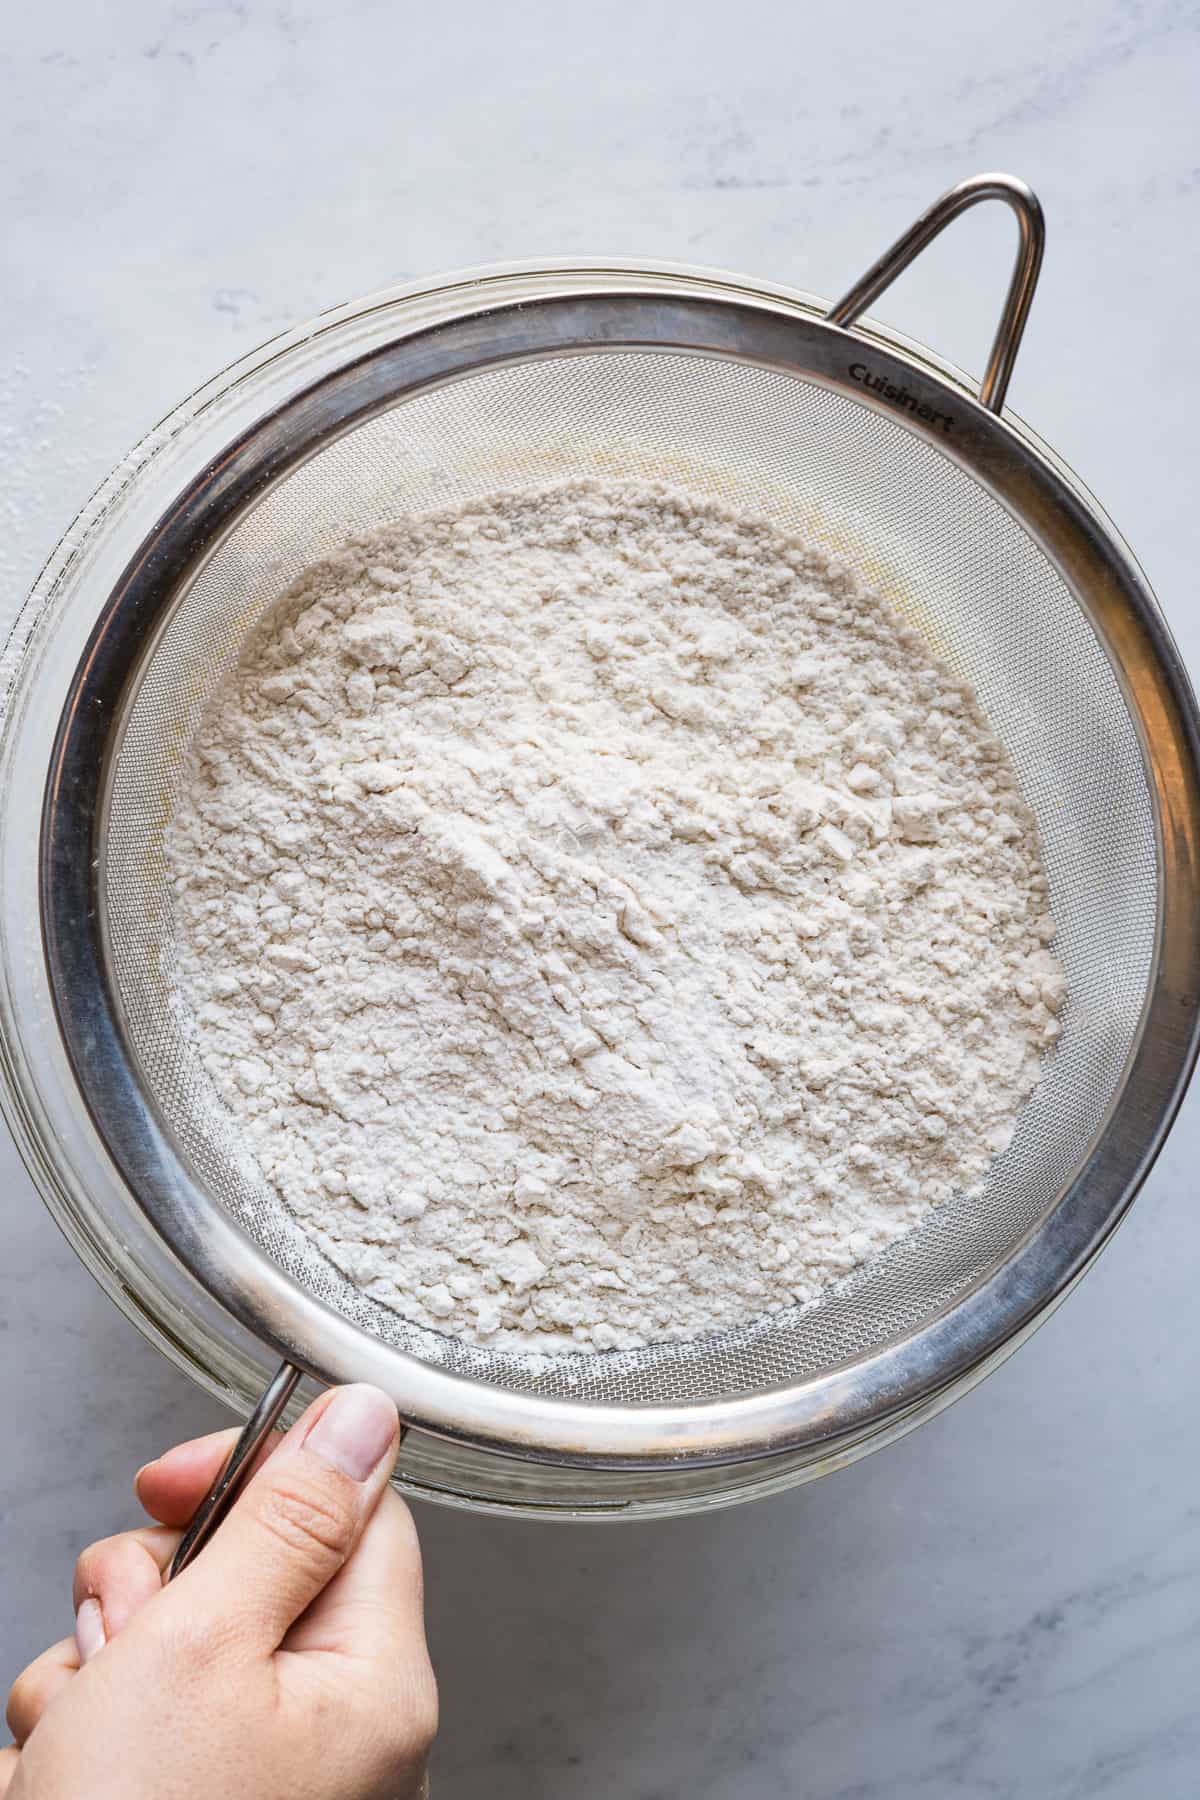 Flour being sifted through a fine mesh strainer into a bowl.